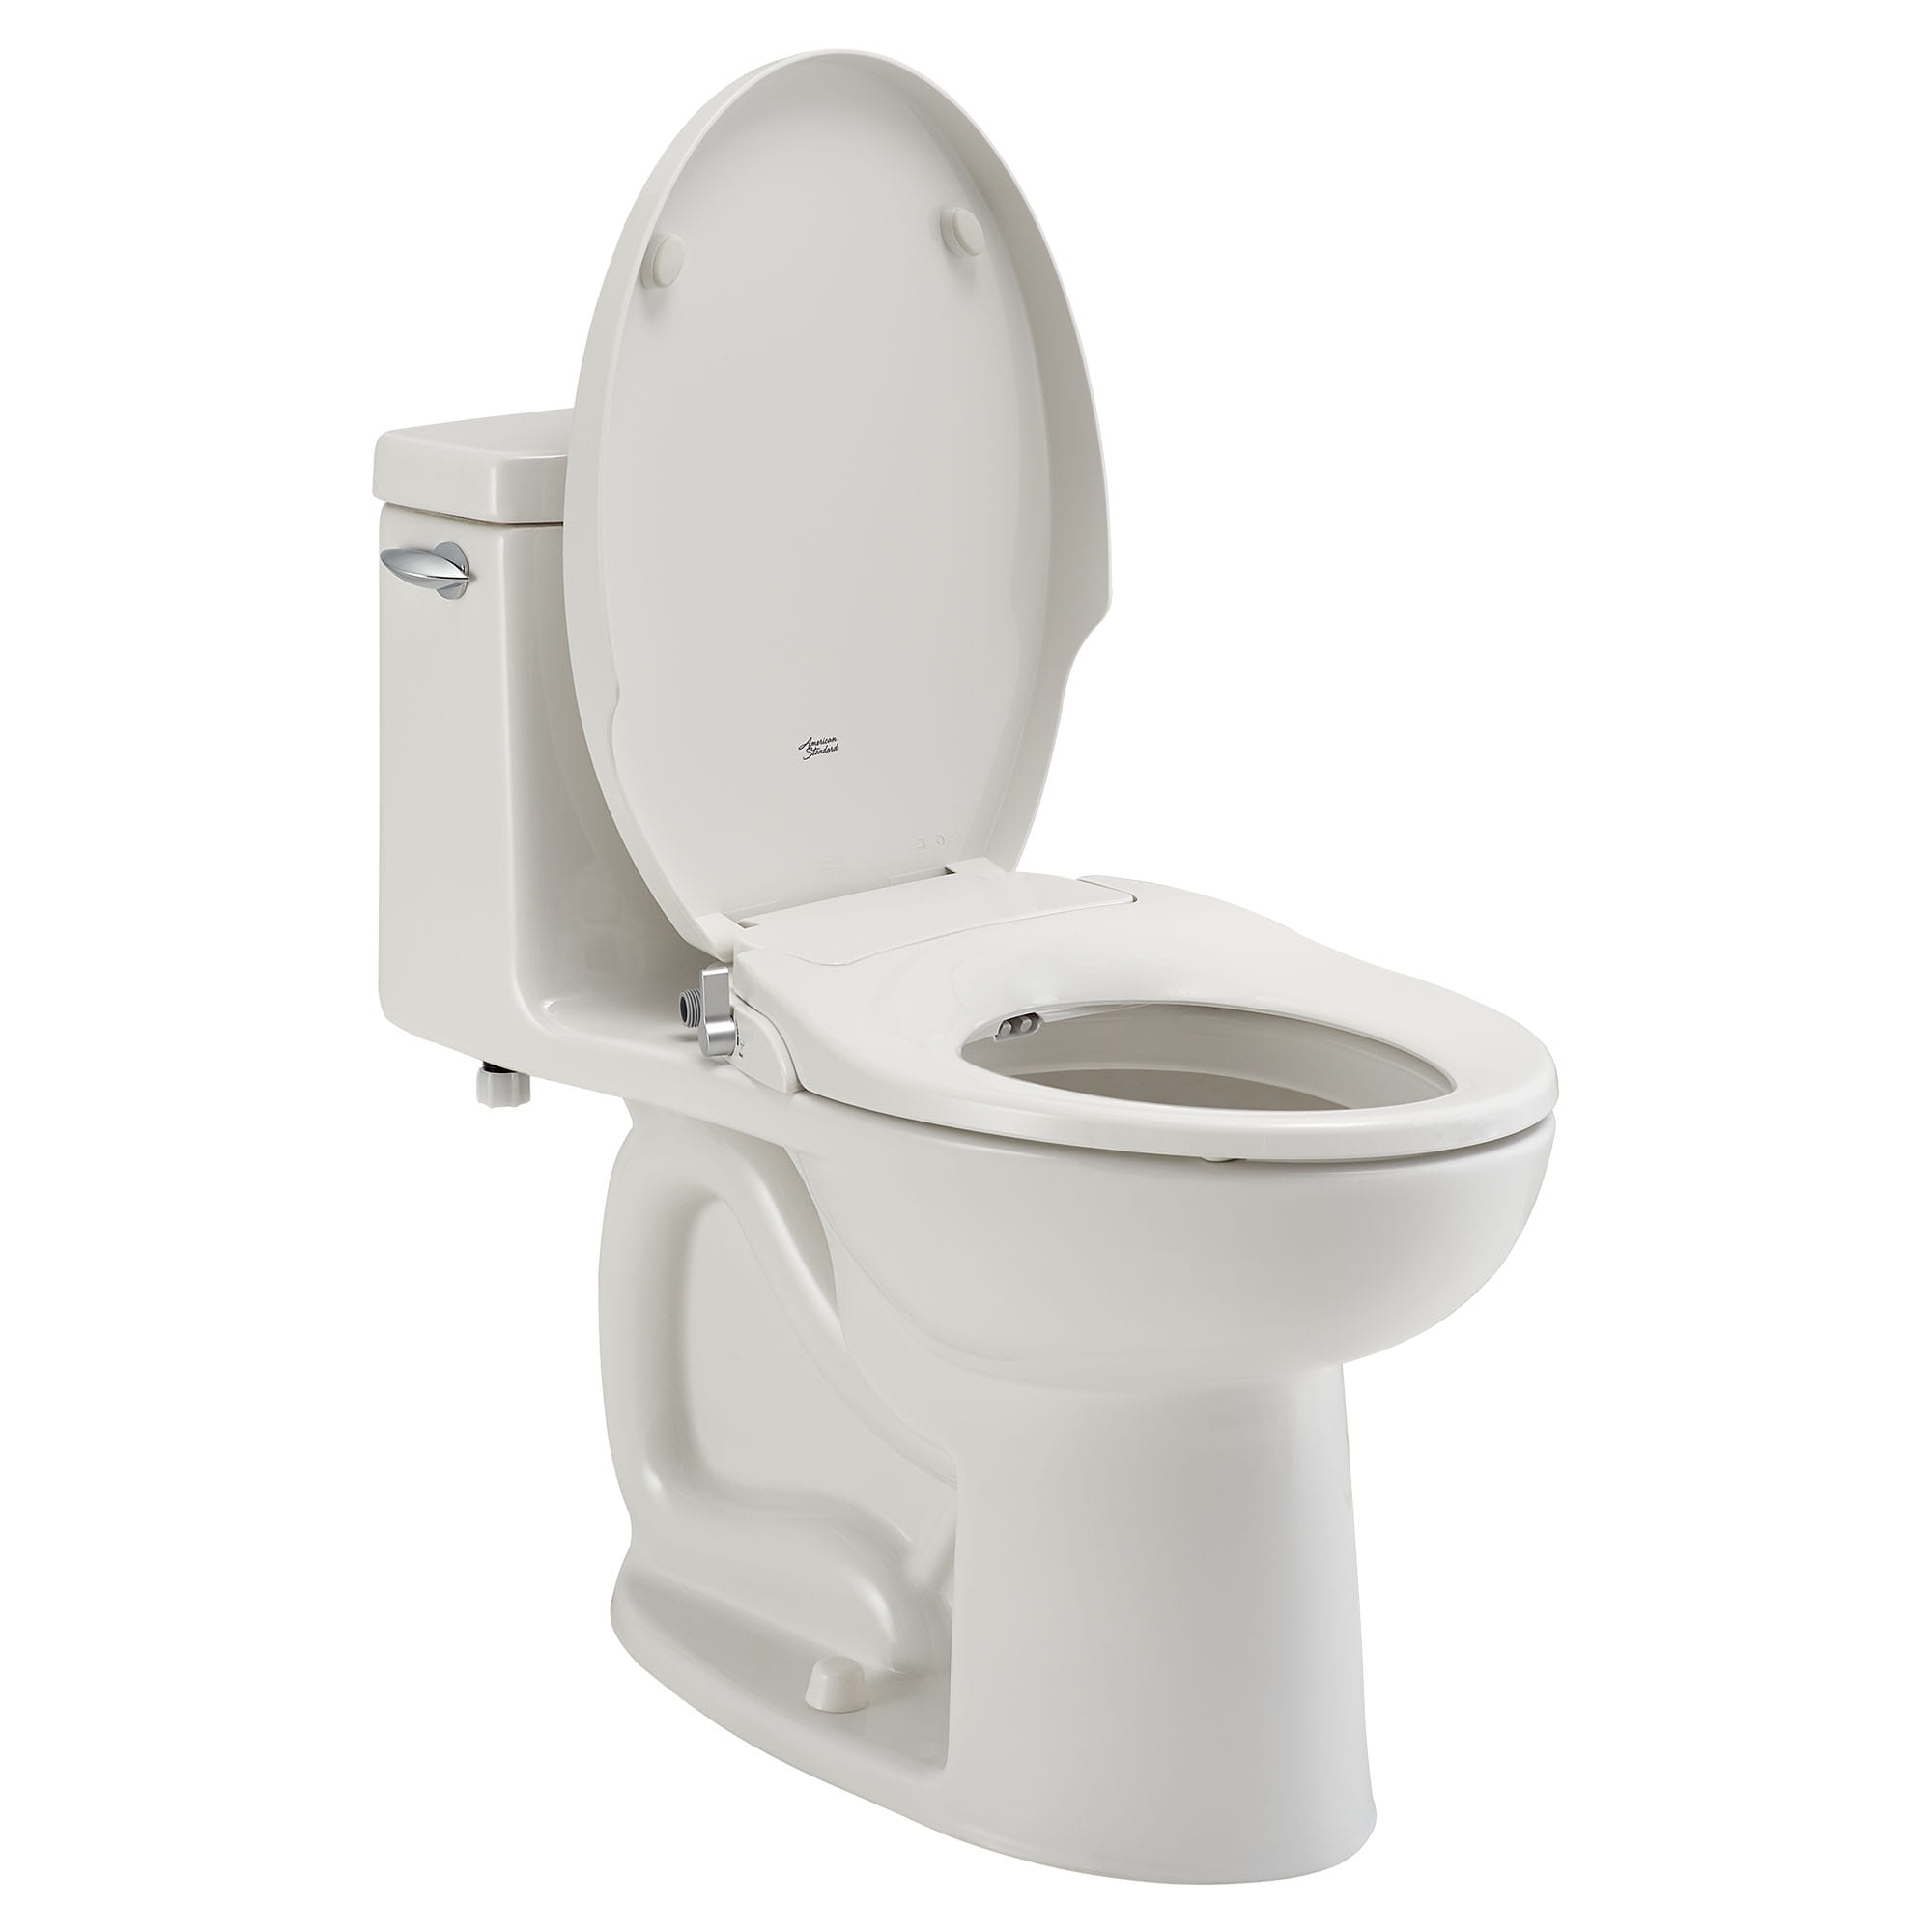 AquaWash® 1.0 Non-Electric SpaLet® Bidet Seat With Manual Operation